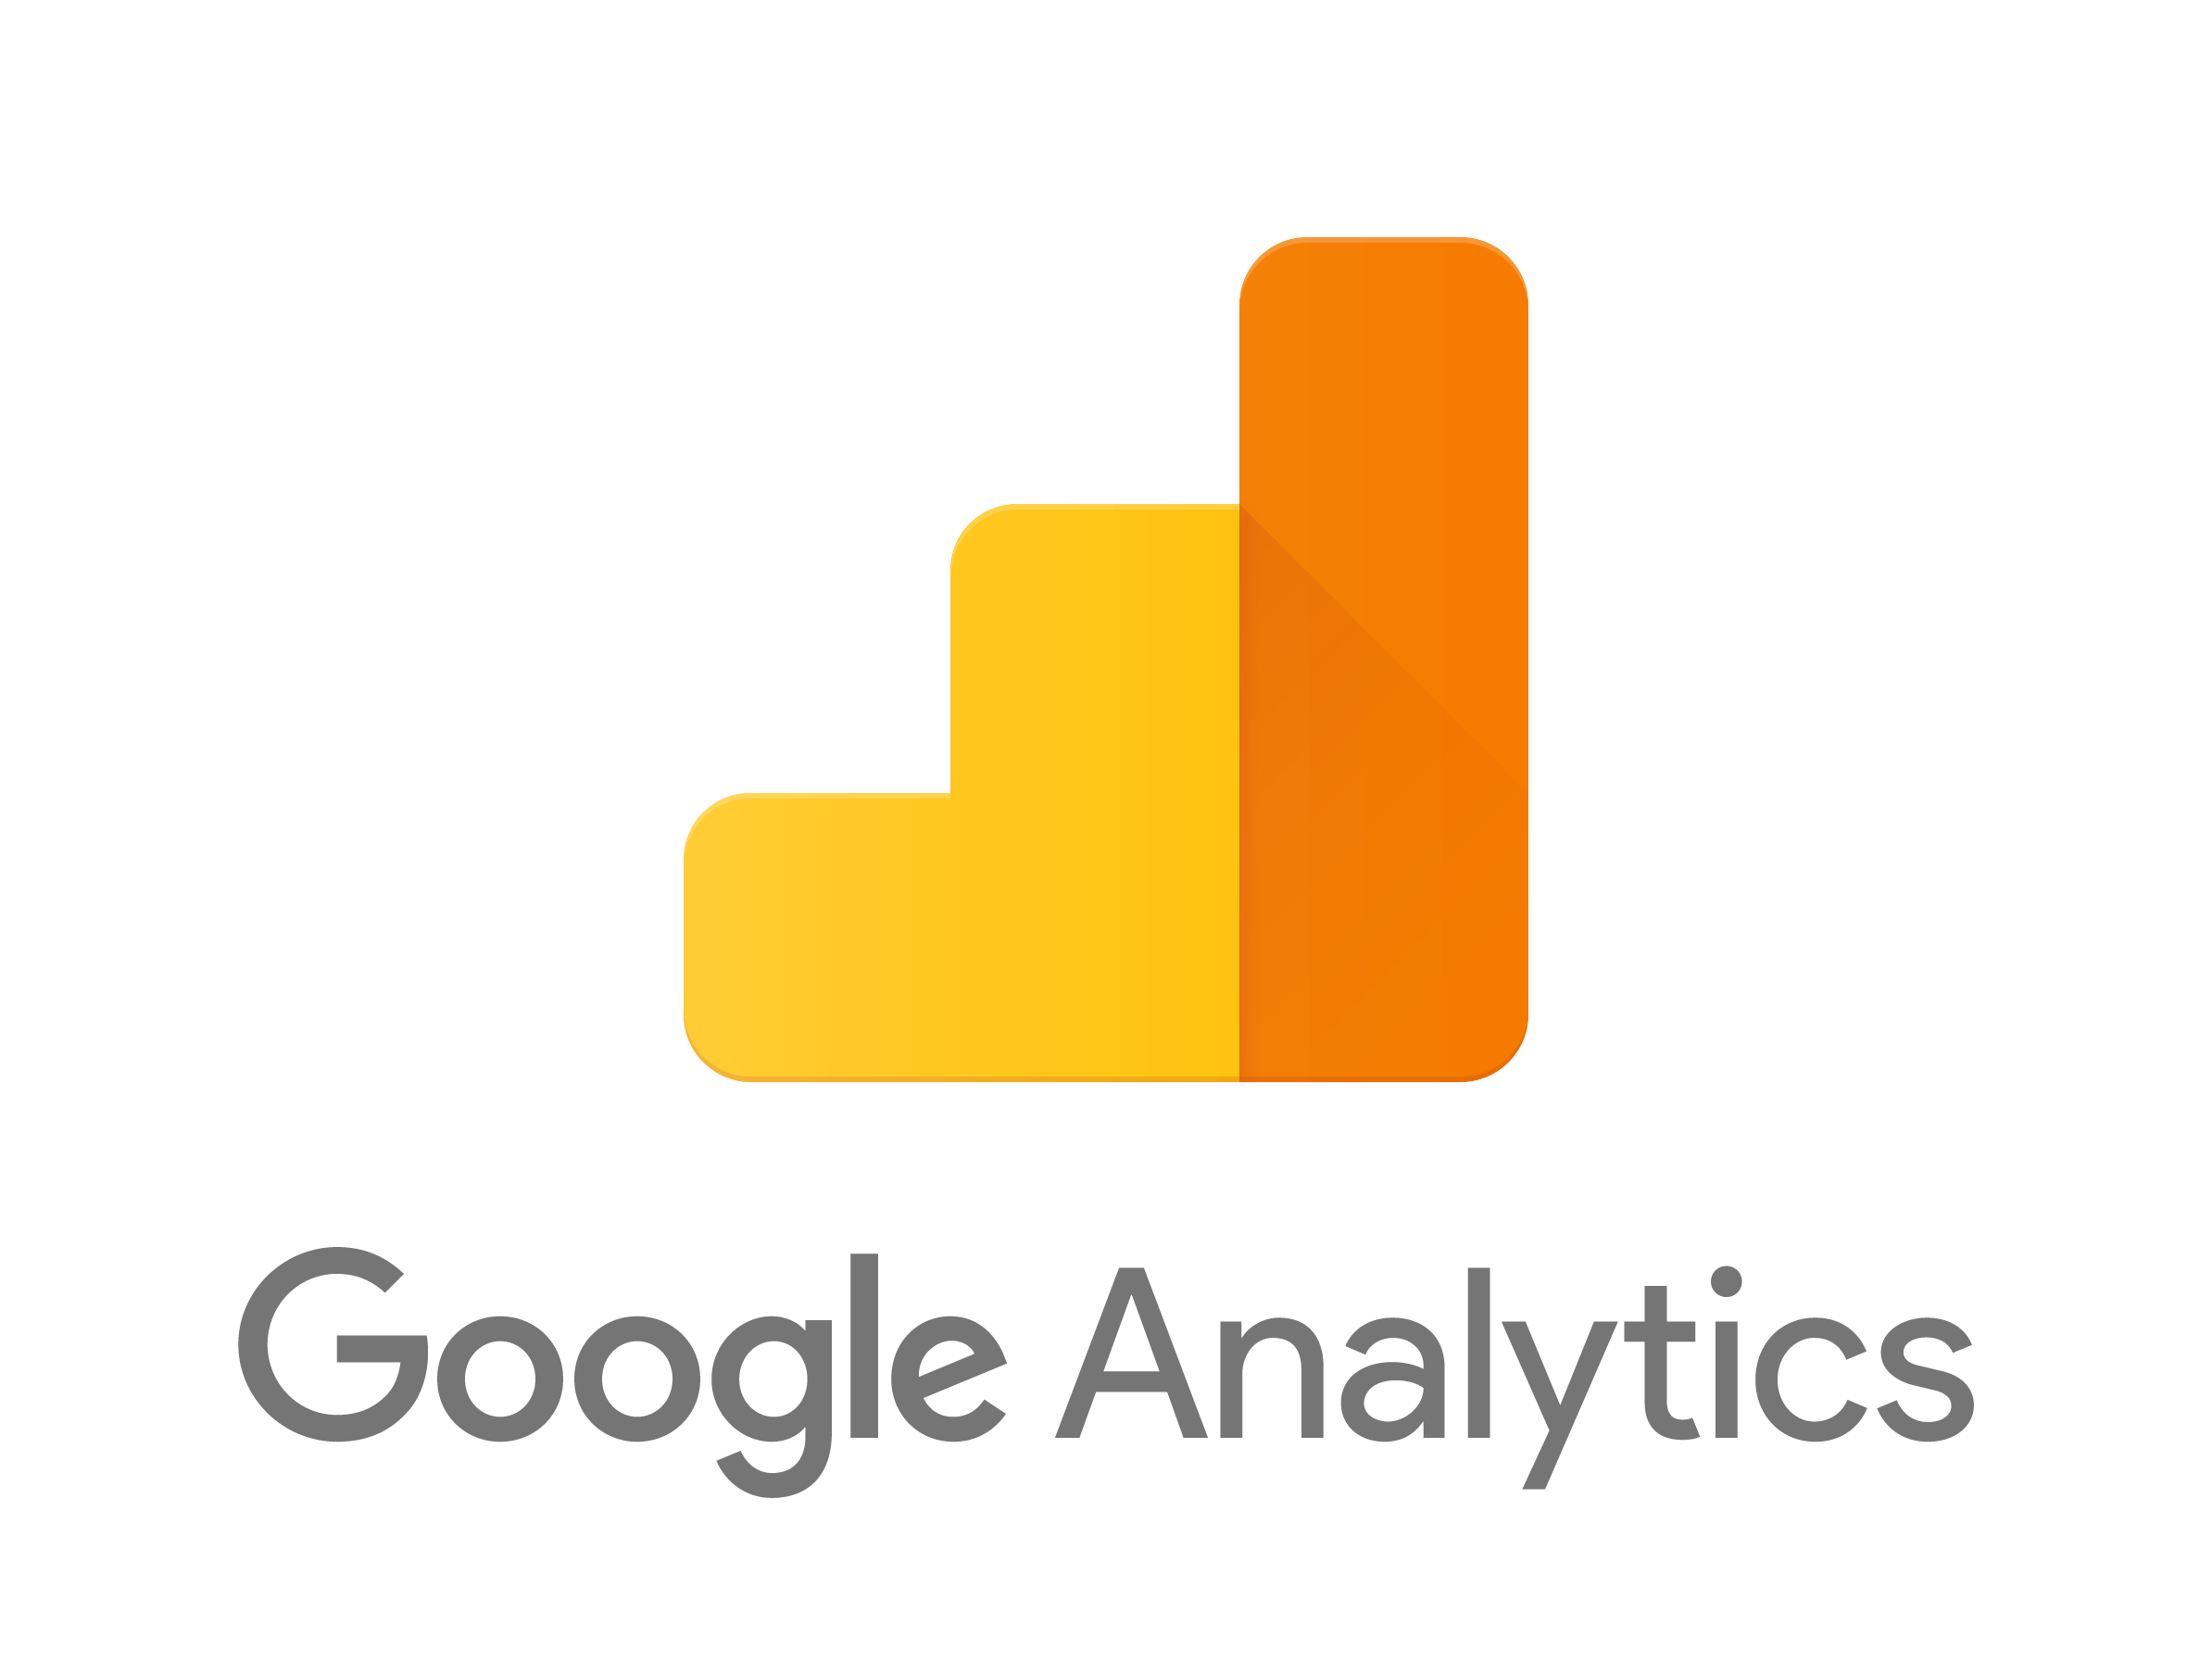 Stop Google Analytics From Tracking My Visits (2018)